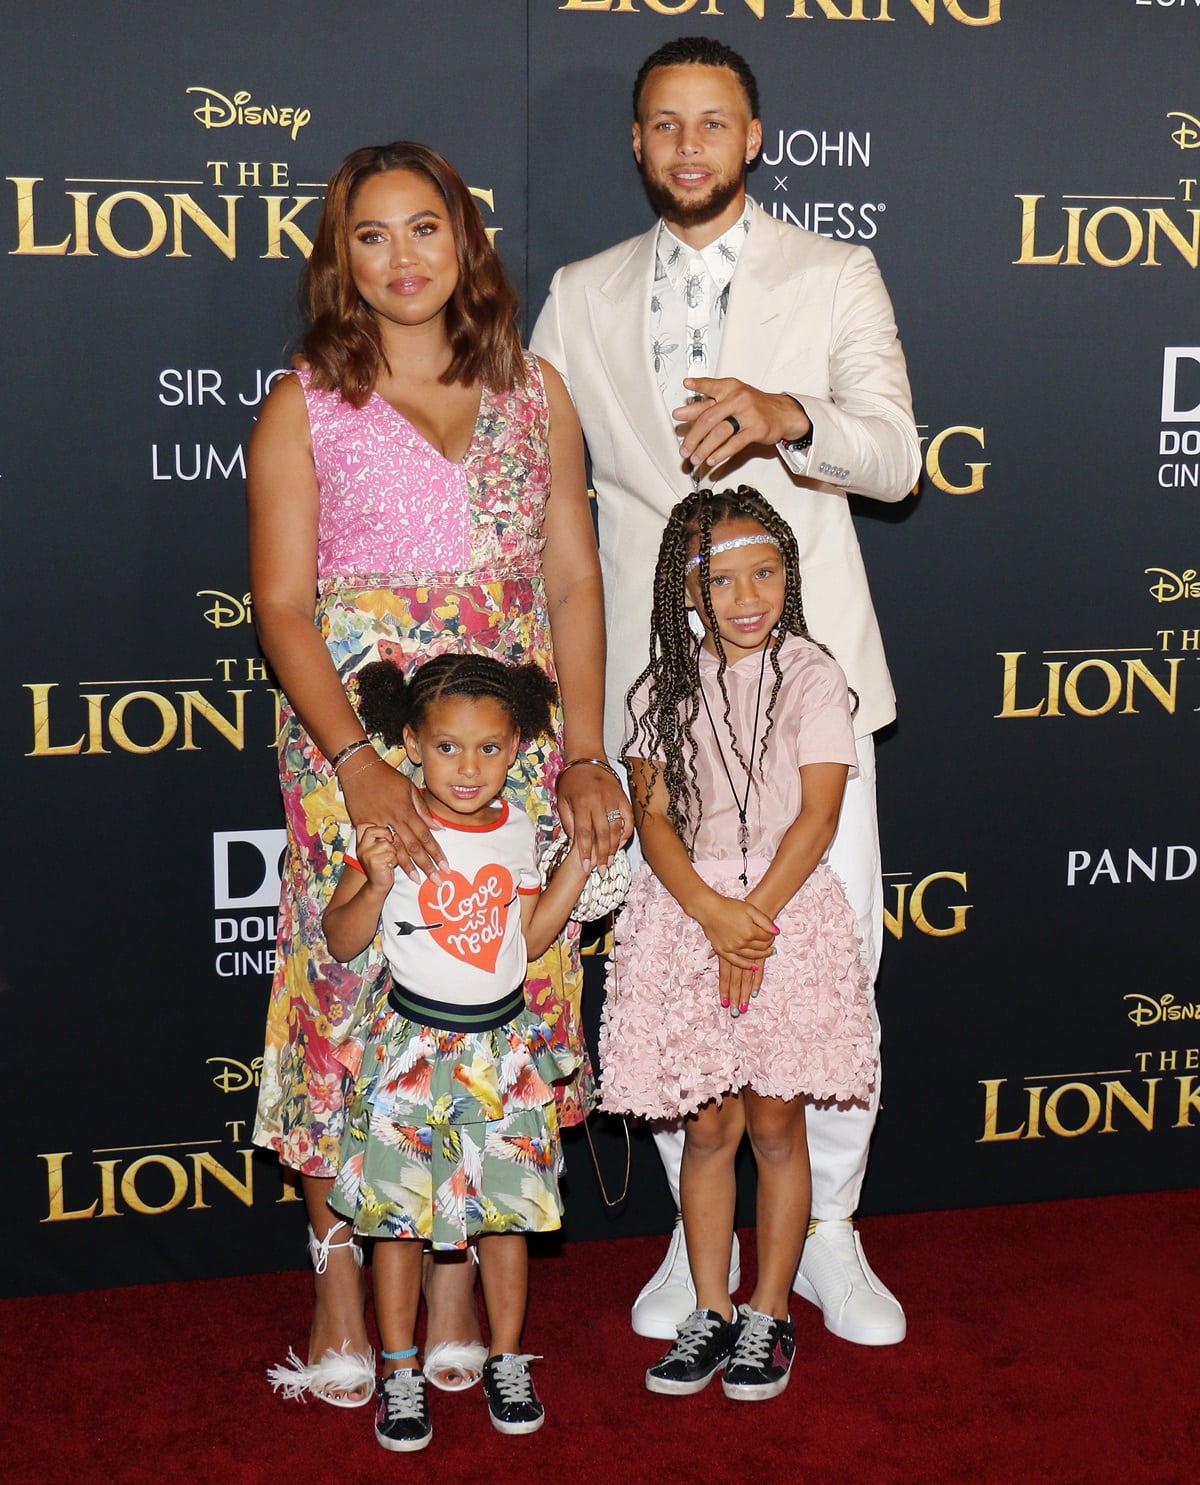 Stephen Curry and Ayesha Curry joined their daughters Ryan Curry and Riley Curry at the glitzy World Premiere of Disney's "The Lion King"